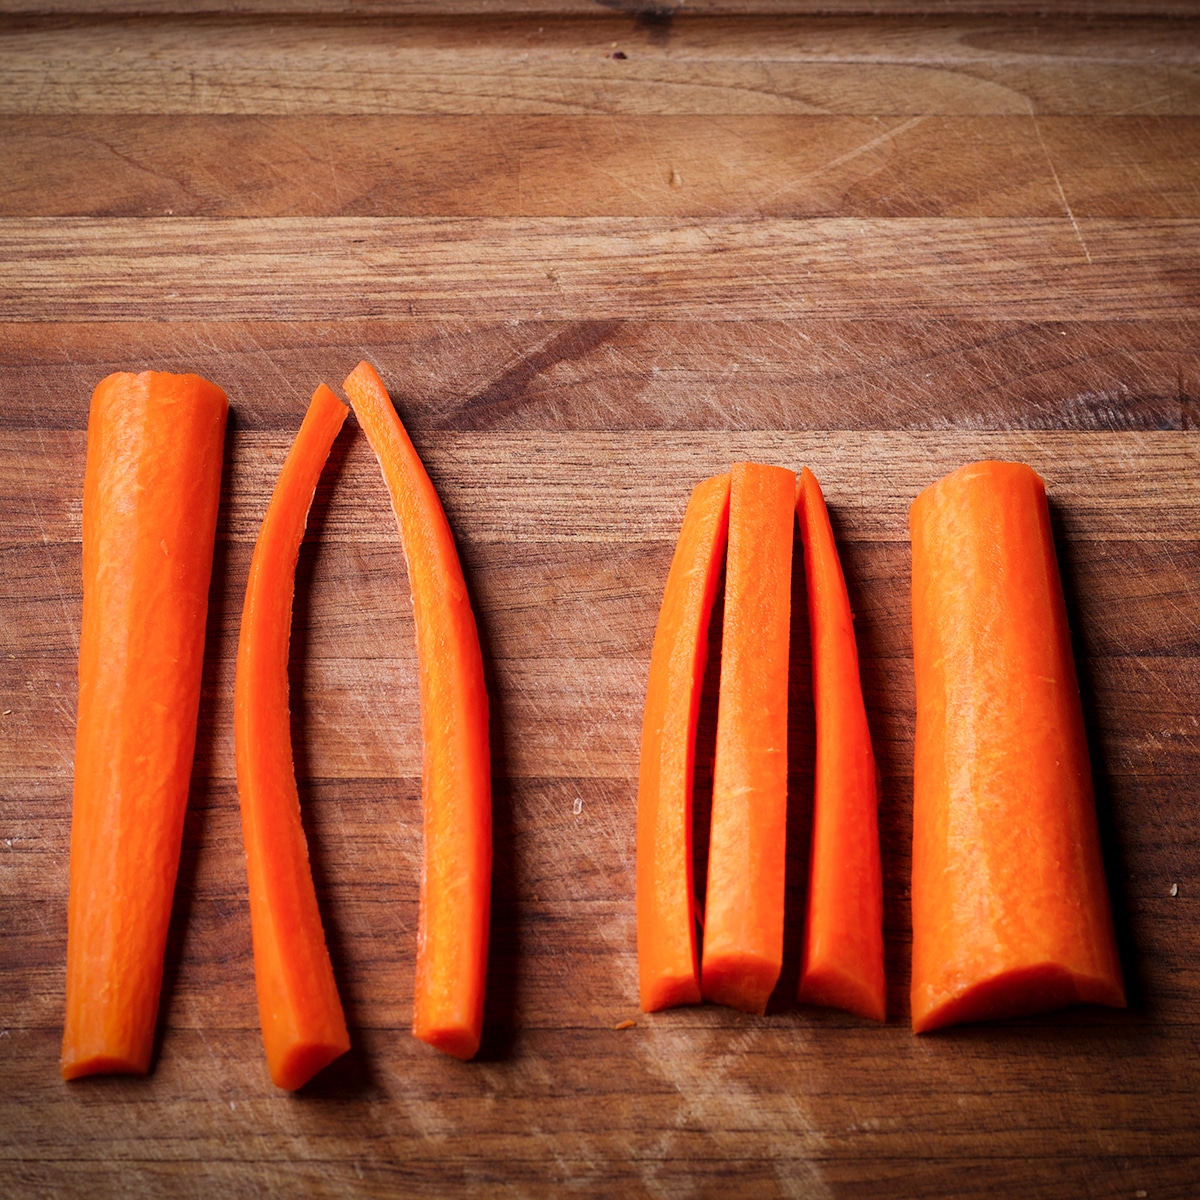 How to cut carrots before roasting them.